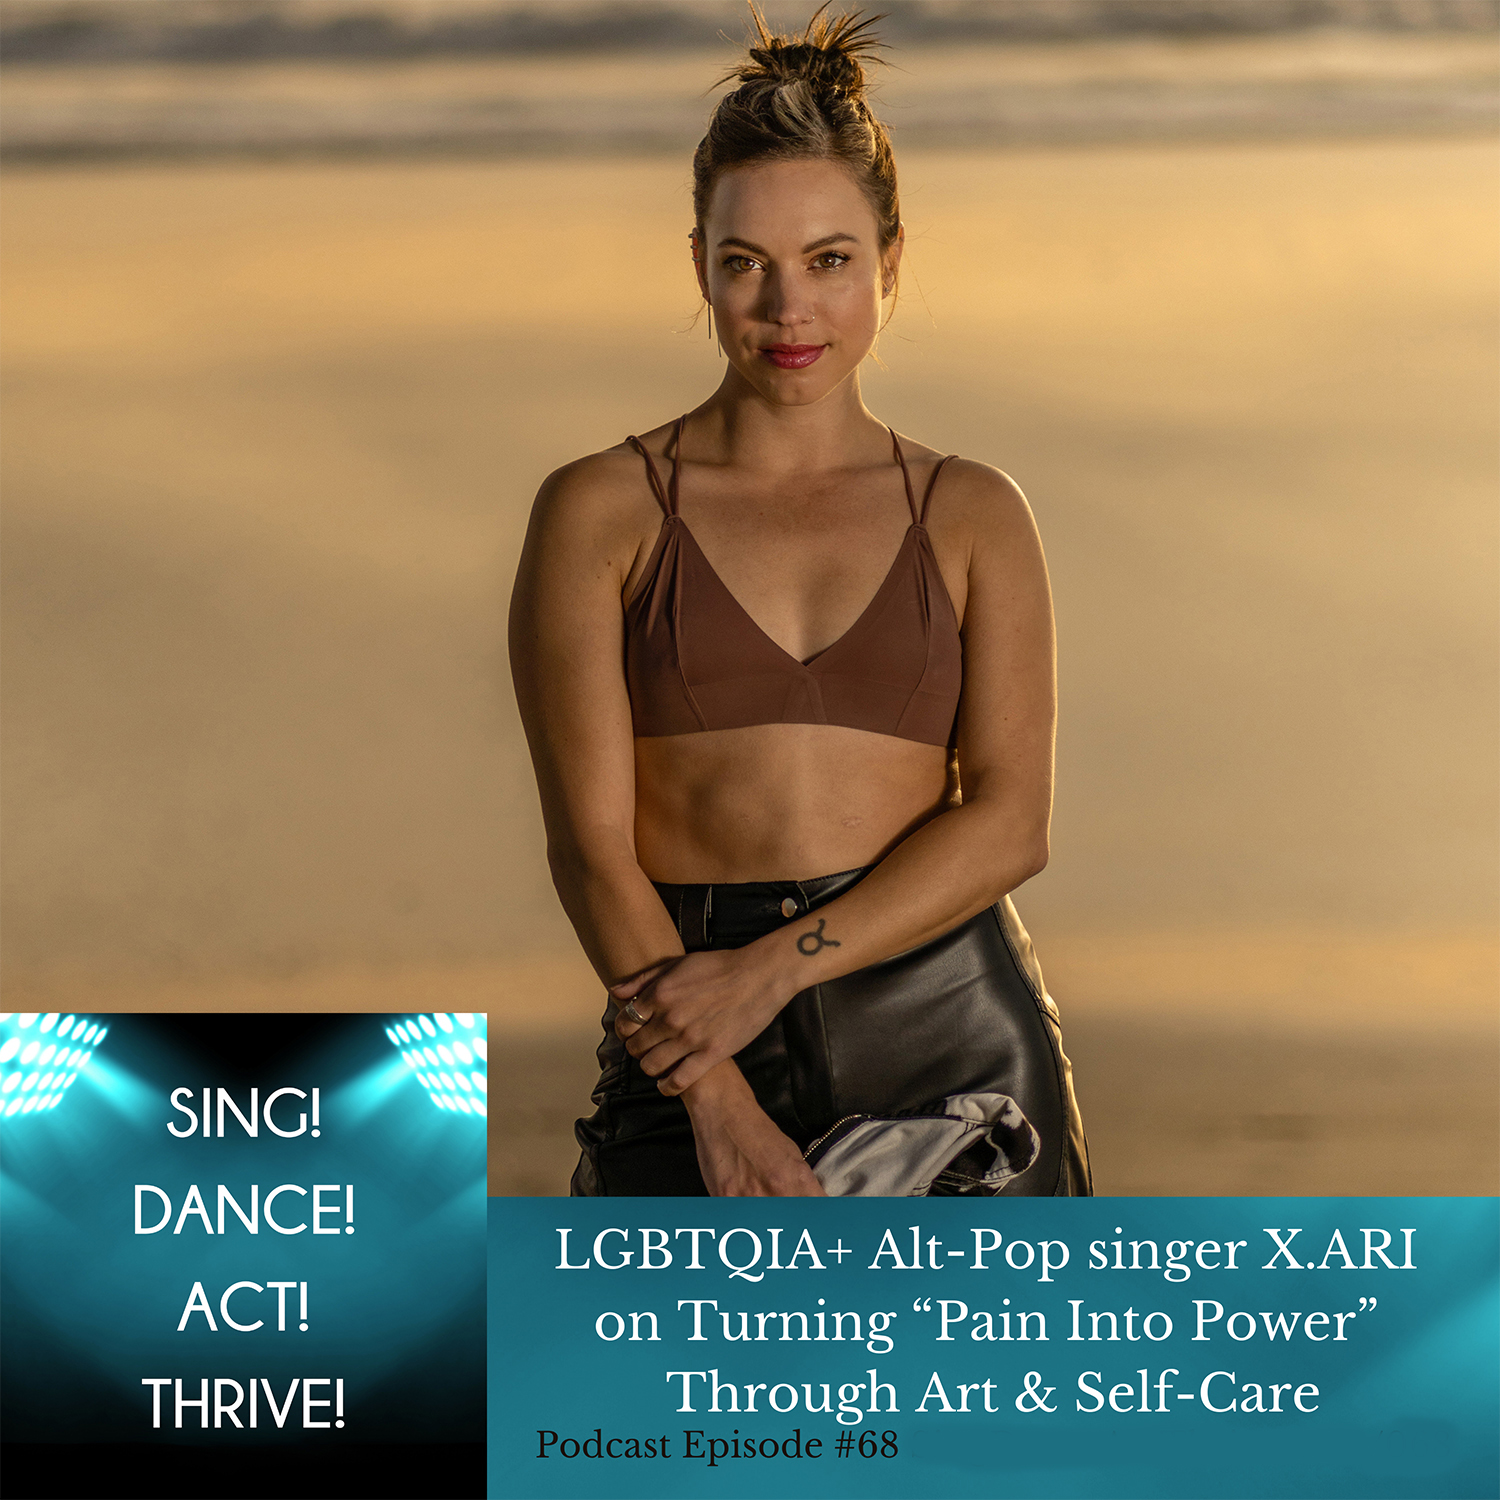 LGBTQIA+ Alt-Pop singer X.ARI on Turning “Pain Into Power” on Multi-Passionate Artists podcast with Diane Foy